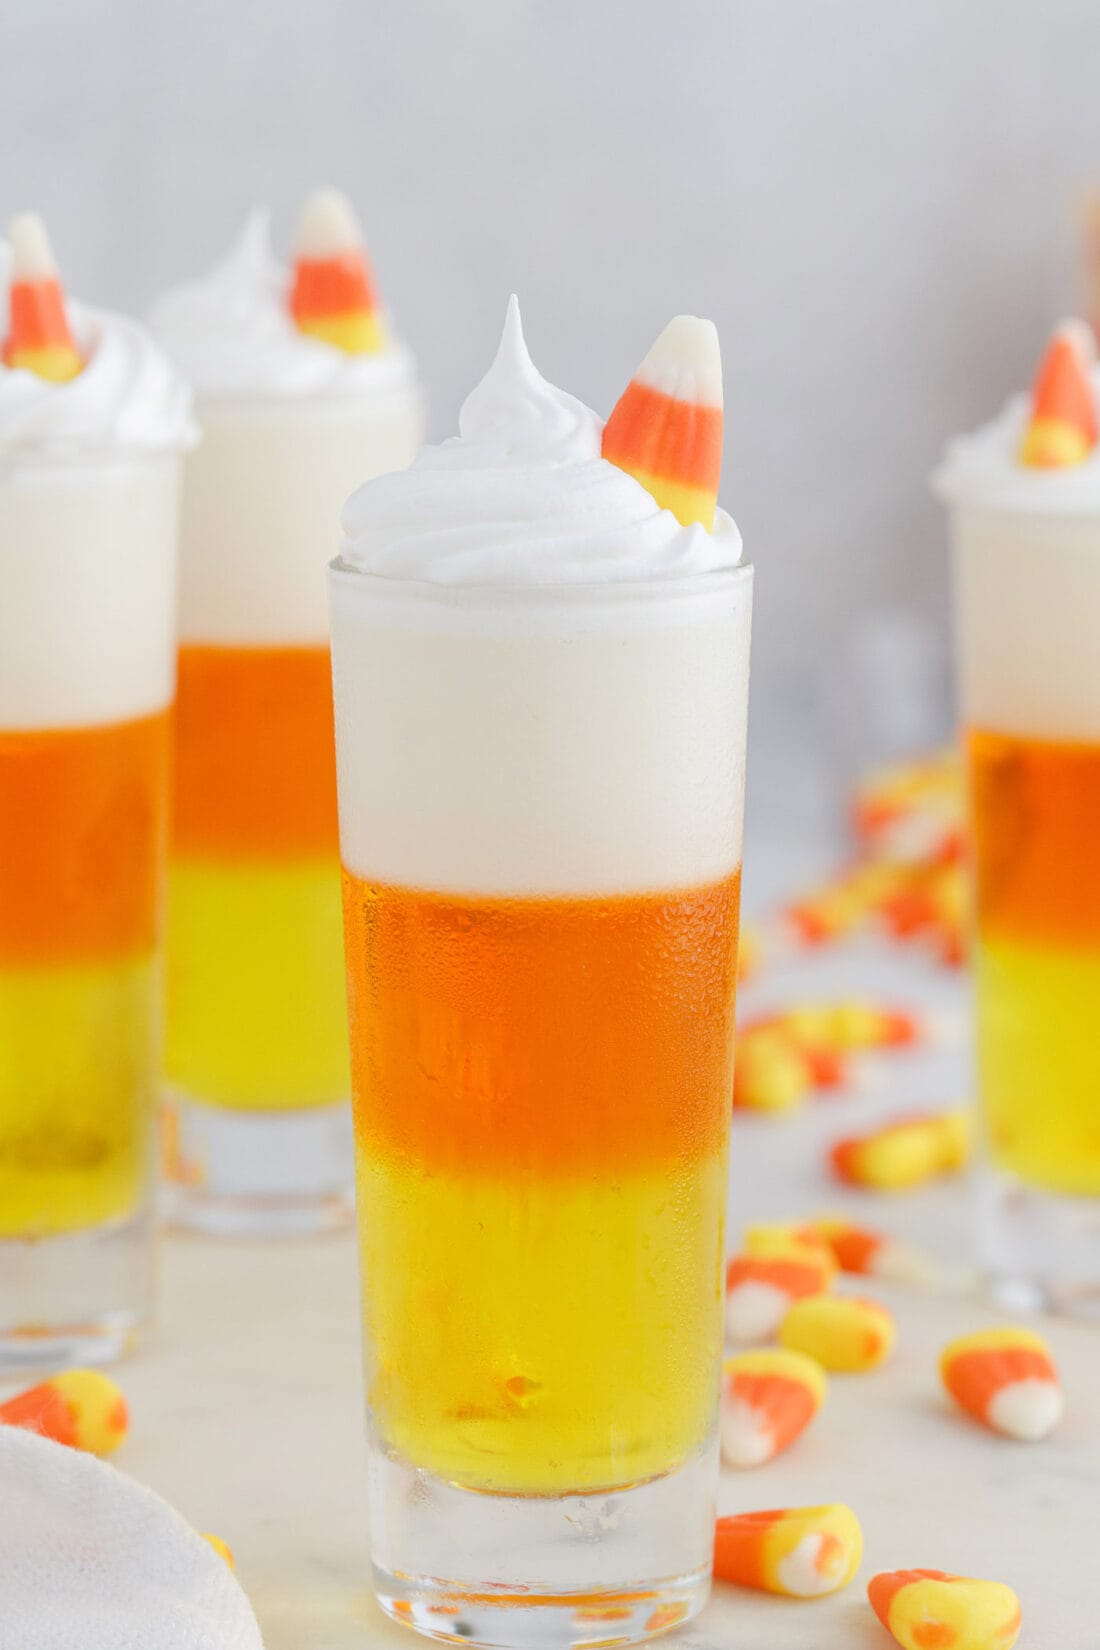 Candy Corn Jello Shots WITH A CANDY CORN ON TOP